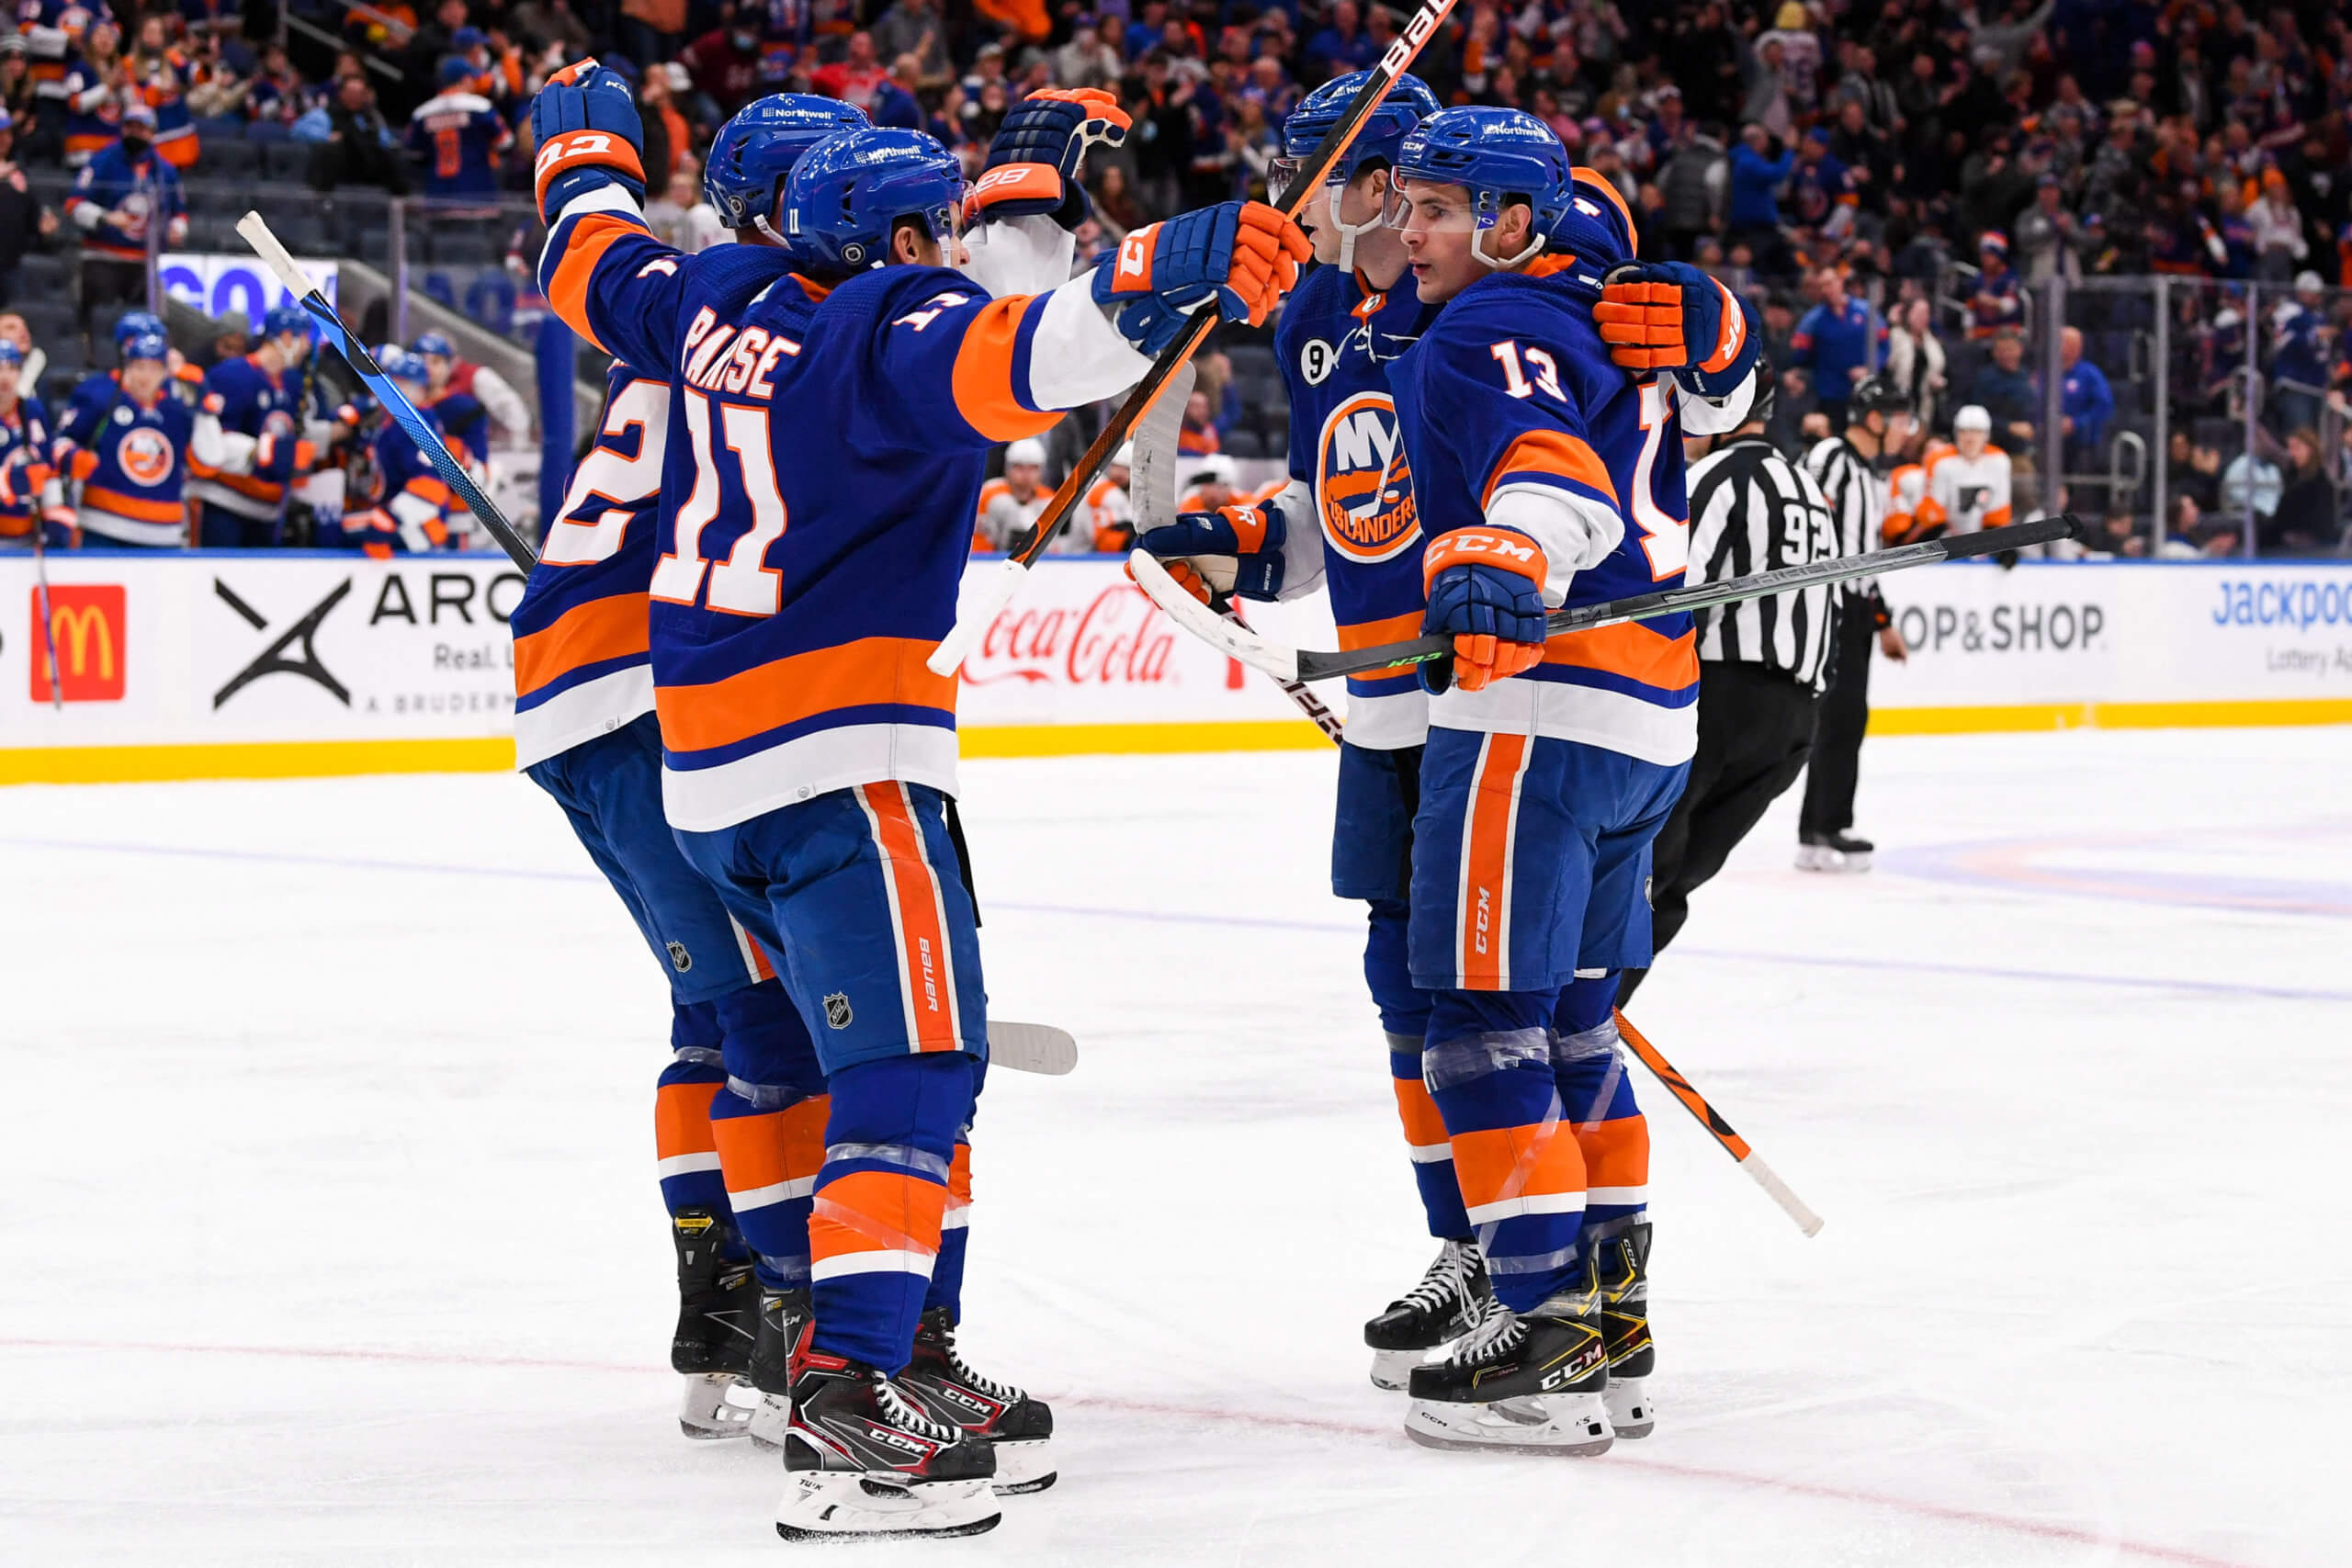 Parise, Greene lead Islanders to first win at new arena